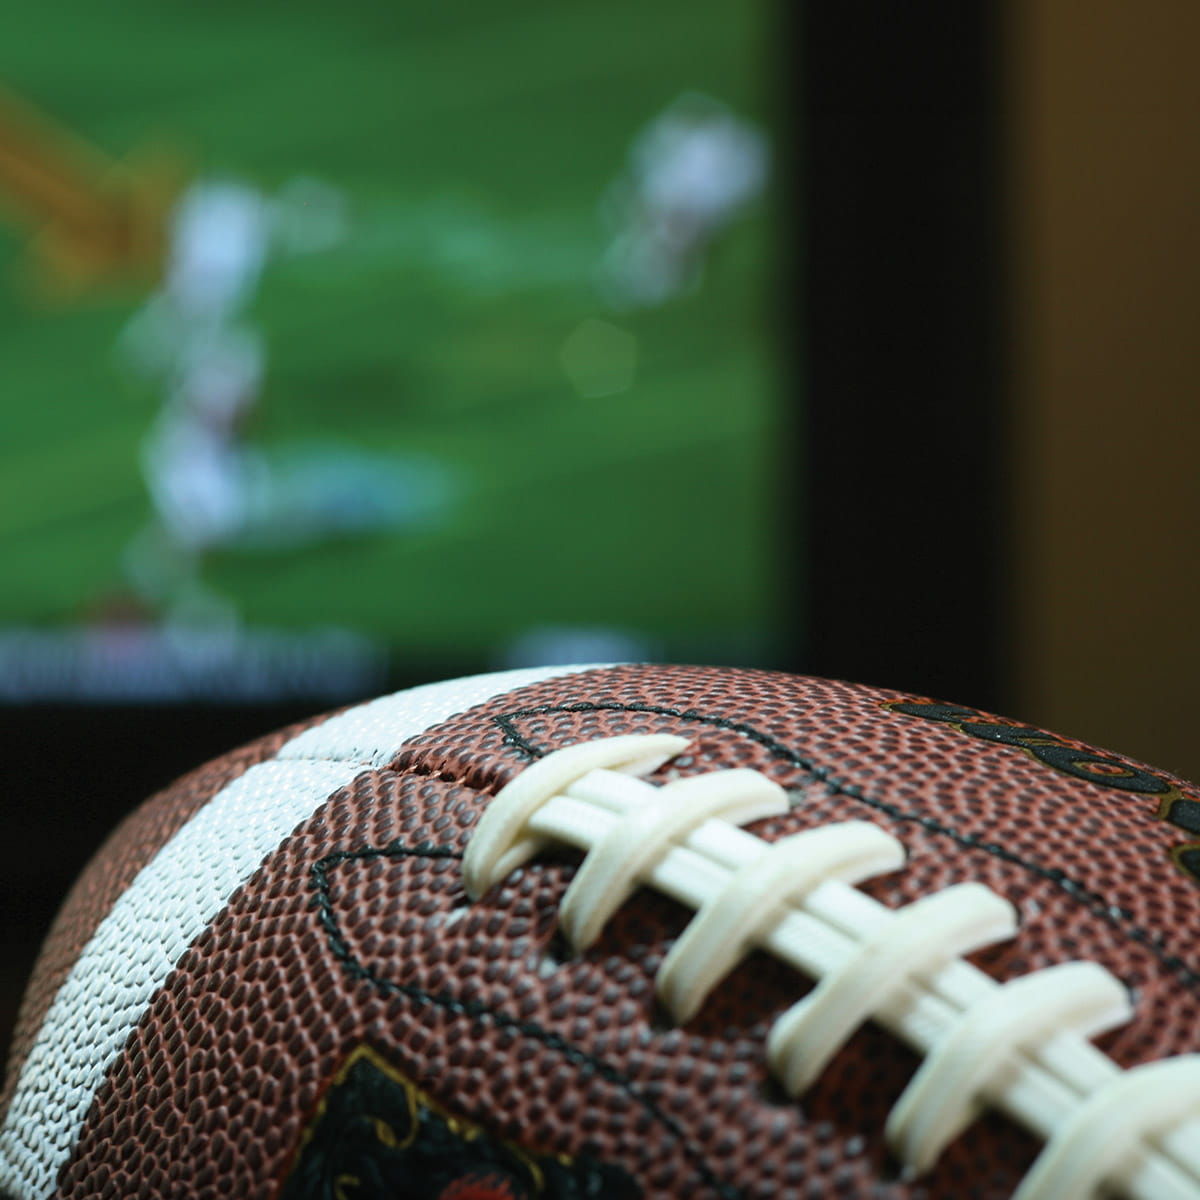 football and TV